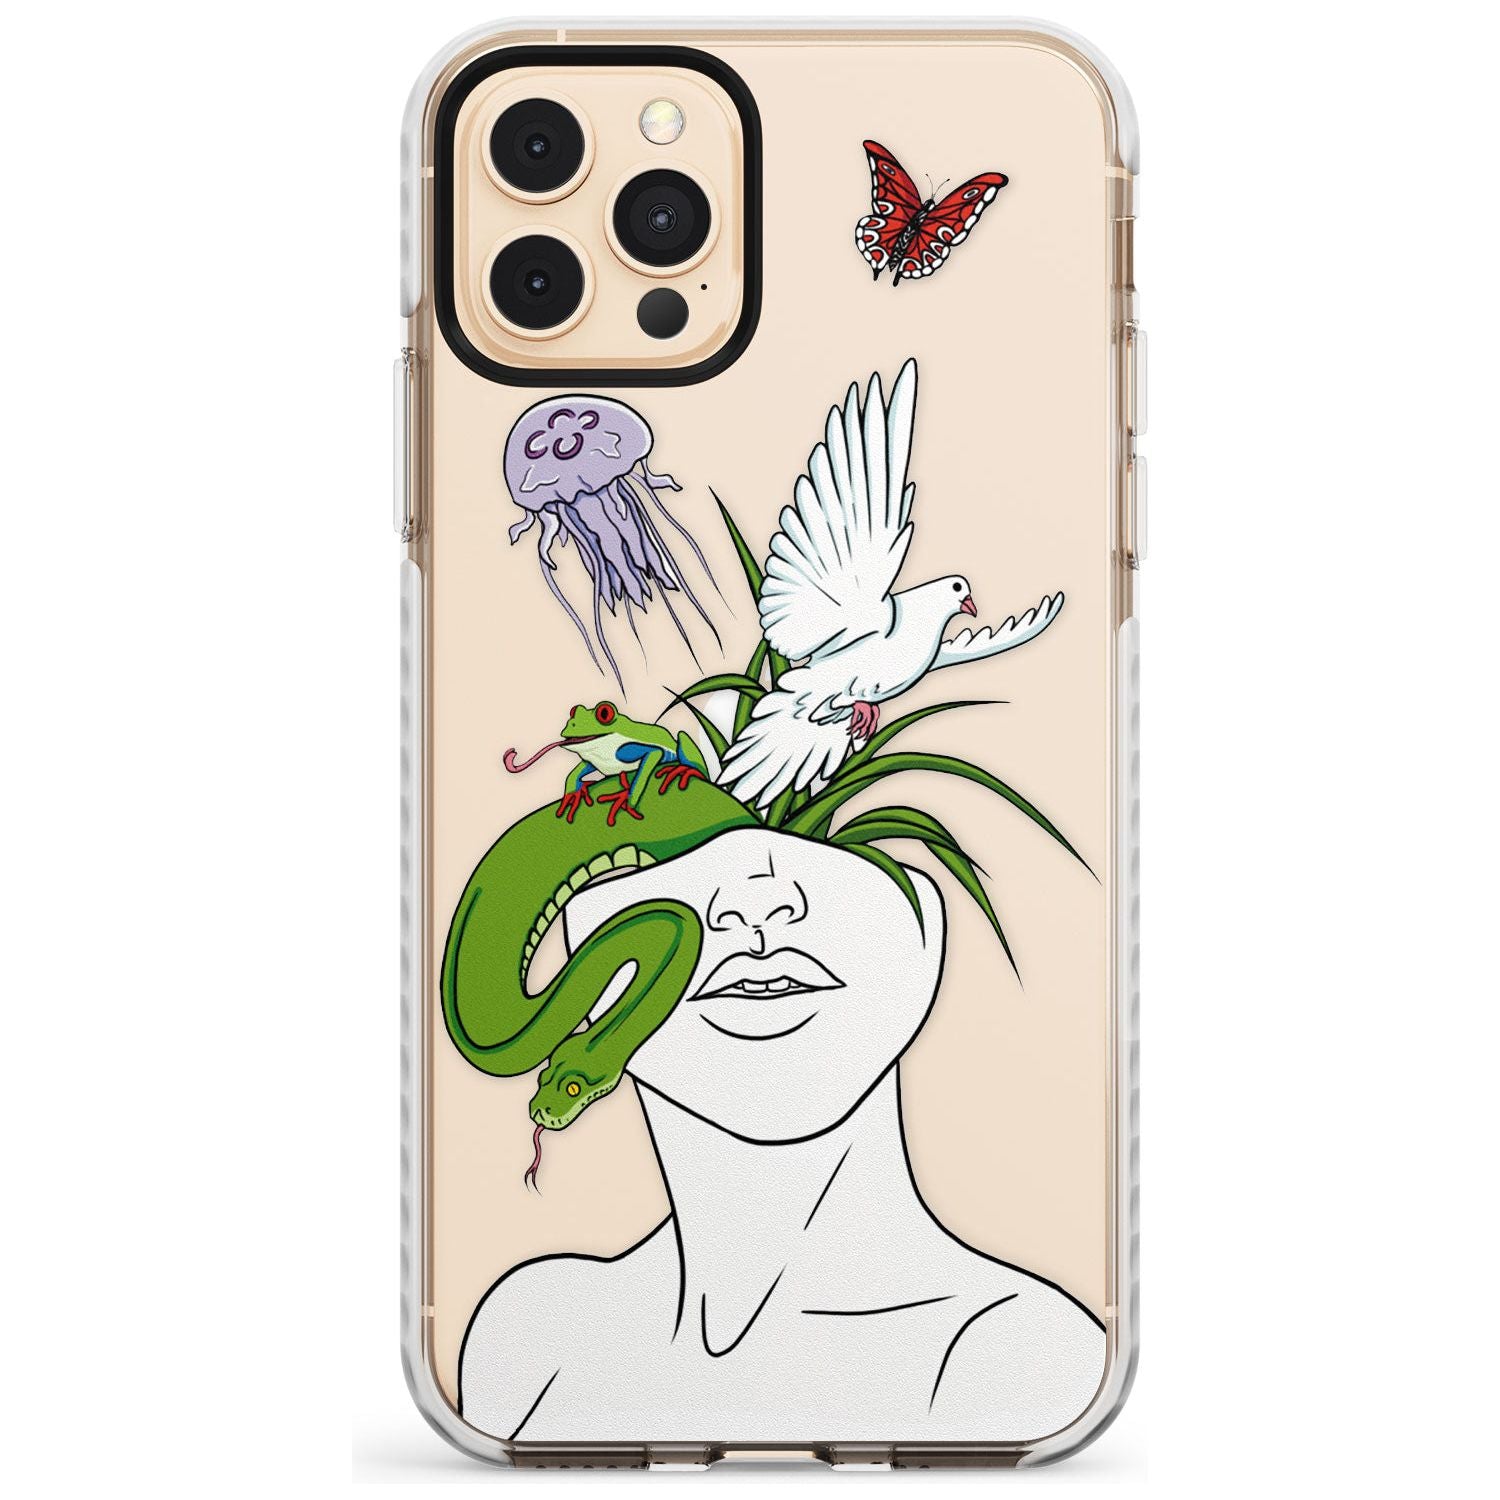 WILD THOUGHTS Slim TPU Phone Case for iPhone 11 Pro Max